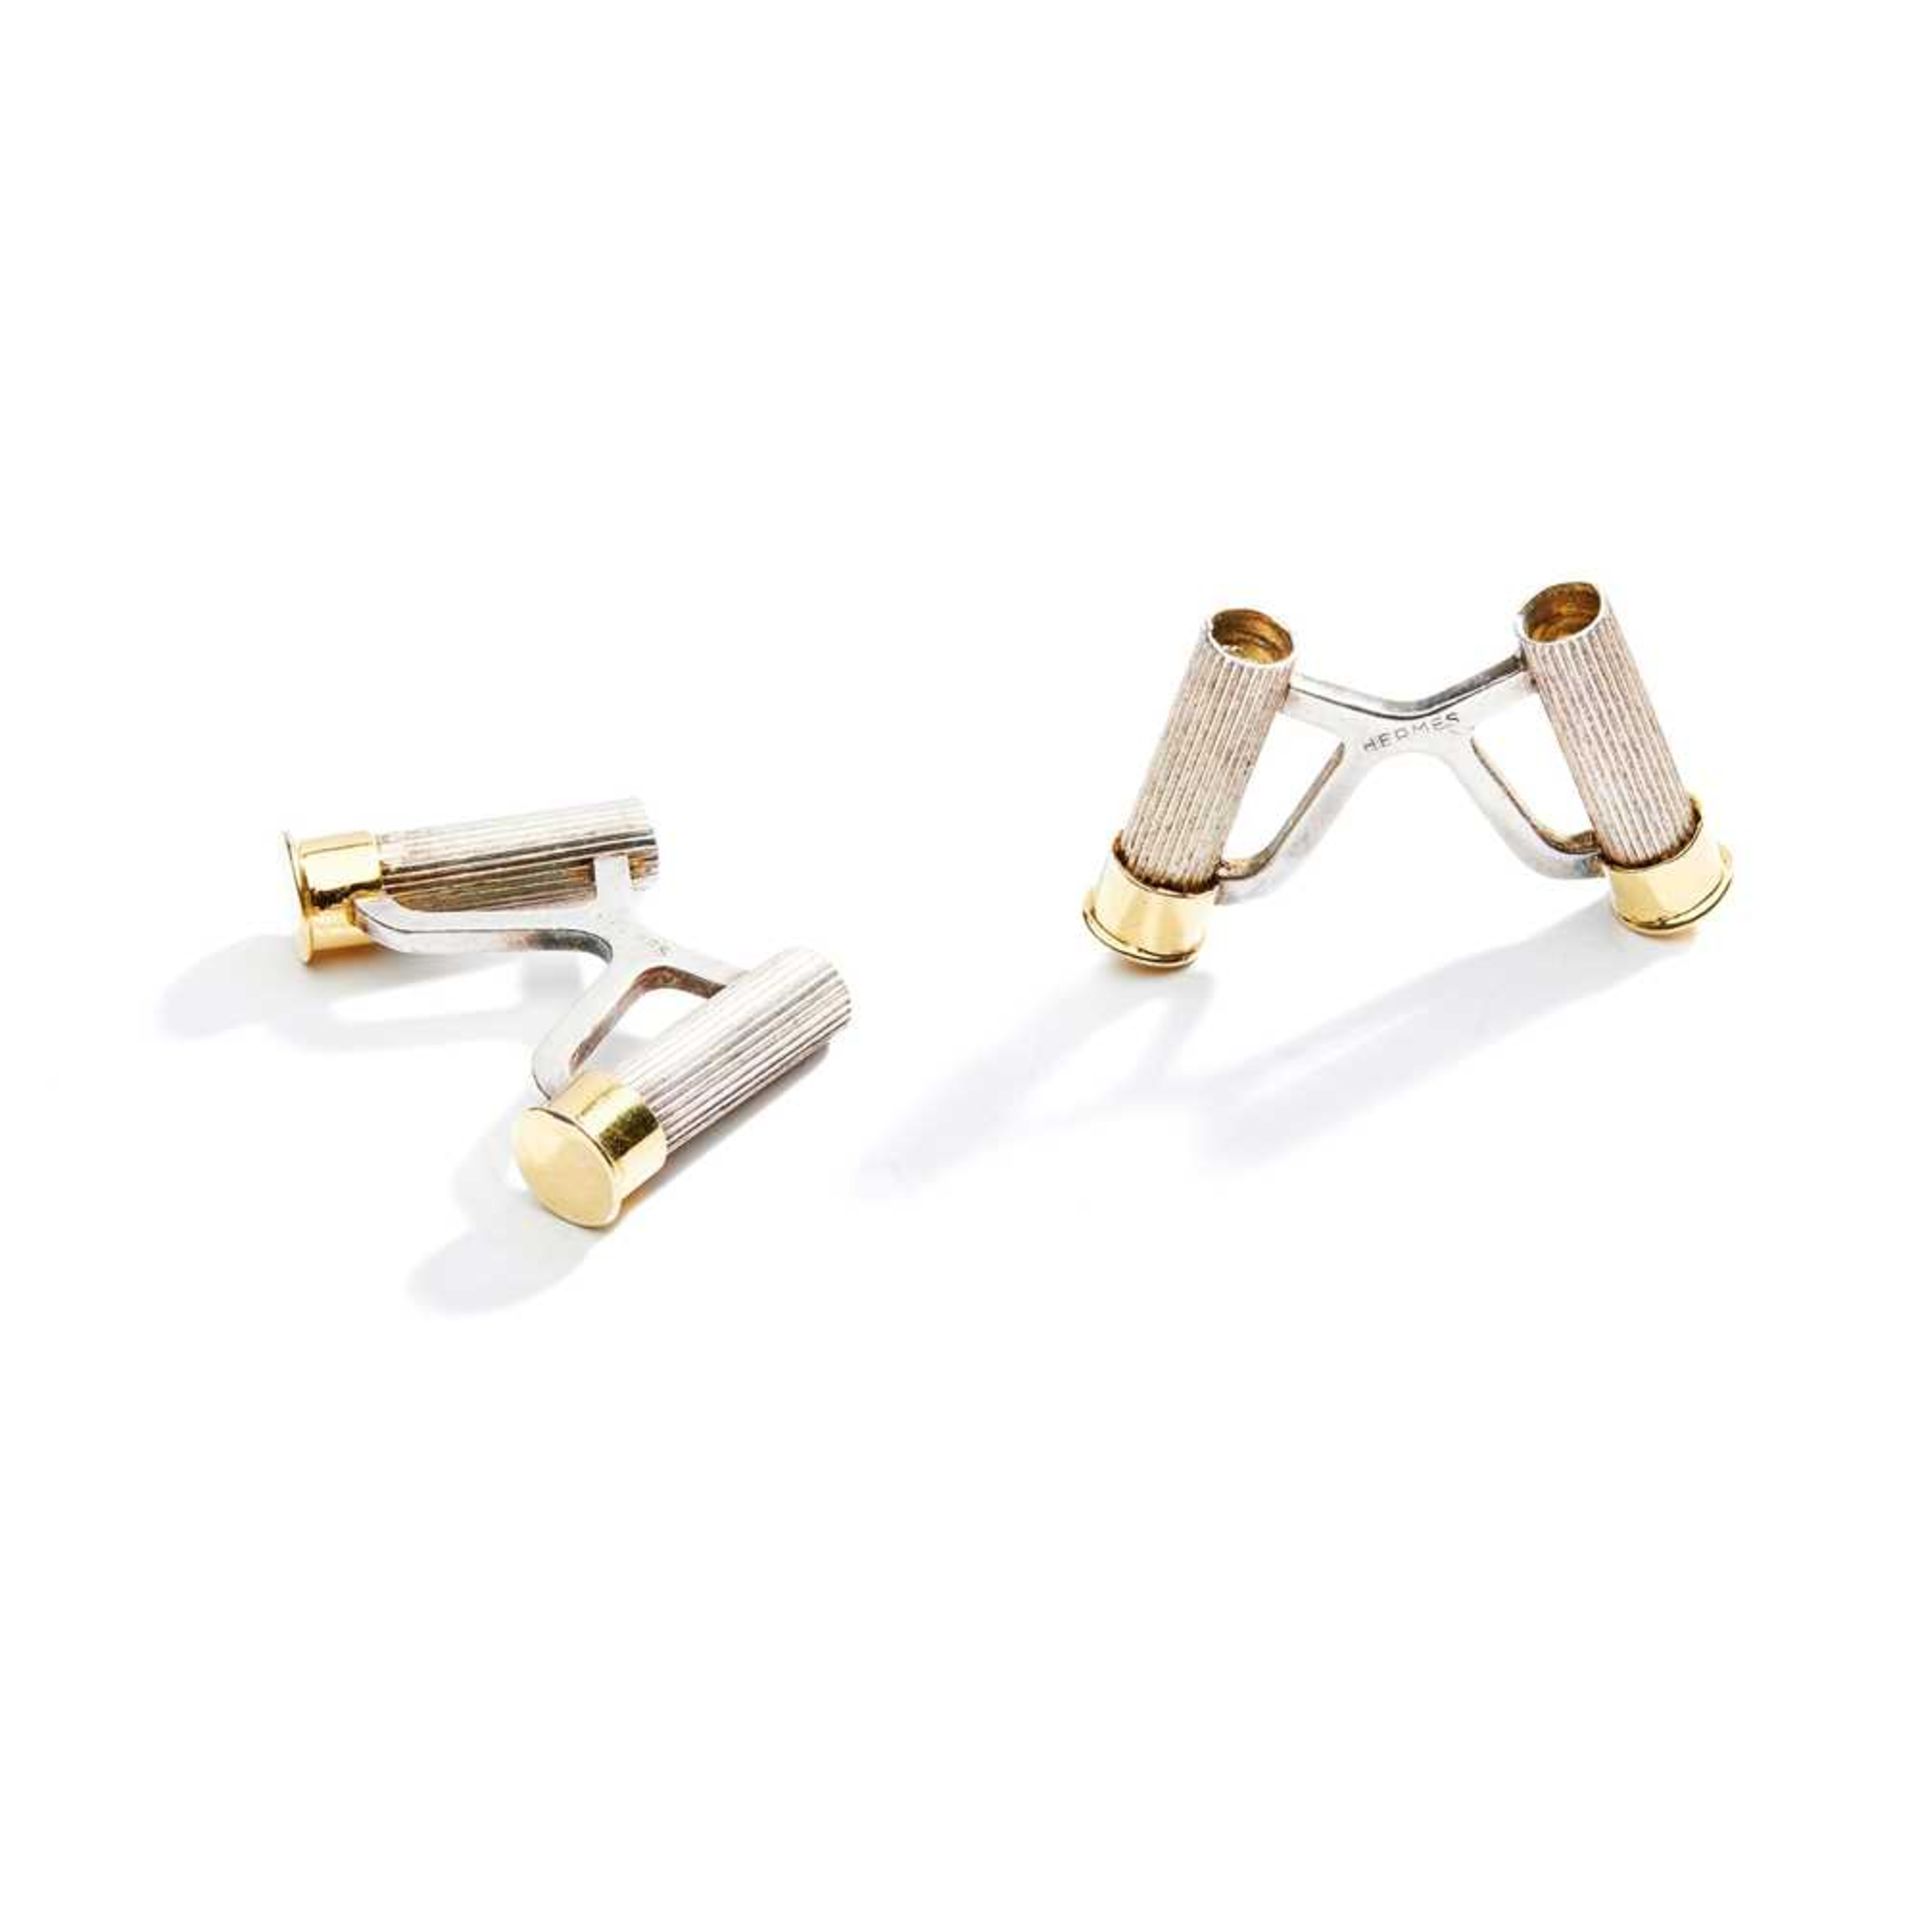 A pair of cufflinks, by Hermes - Image 2 of 2